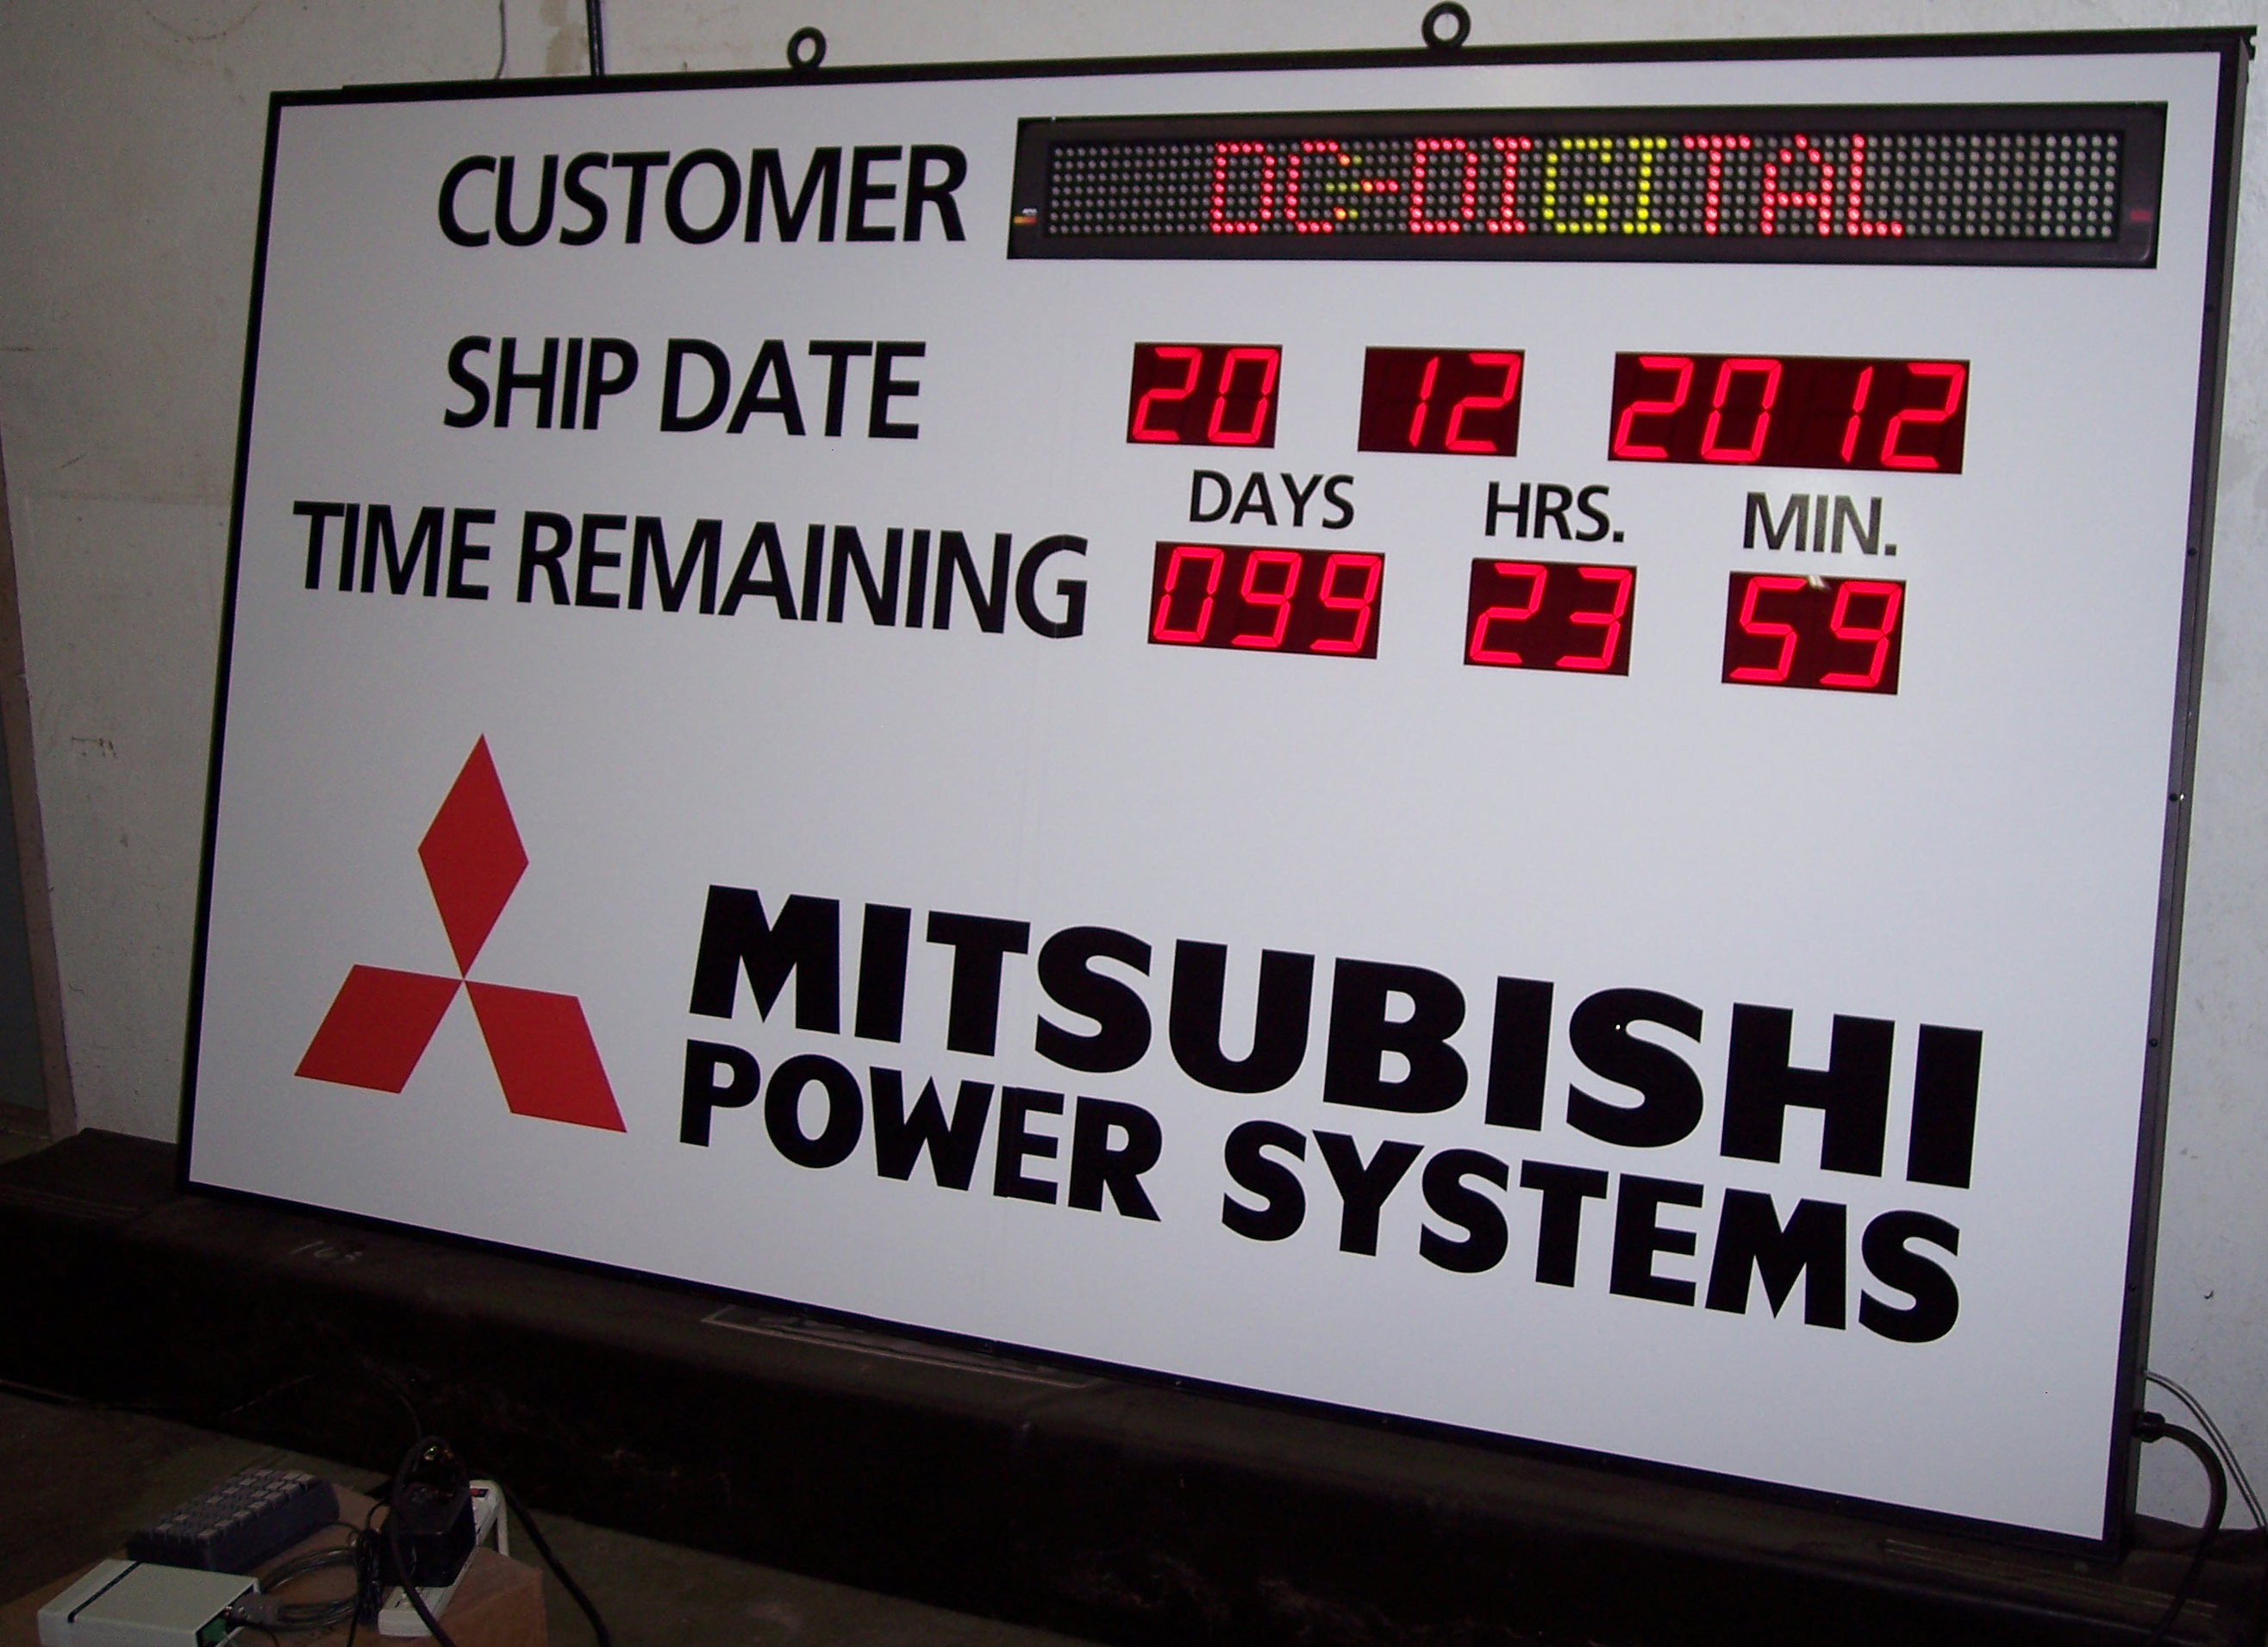 Mitsubishi power Ship Date Timers and message board